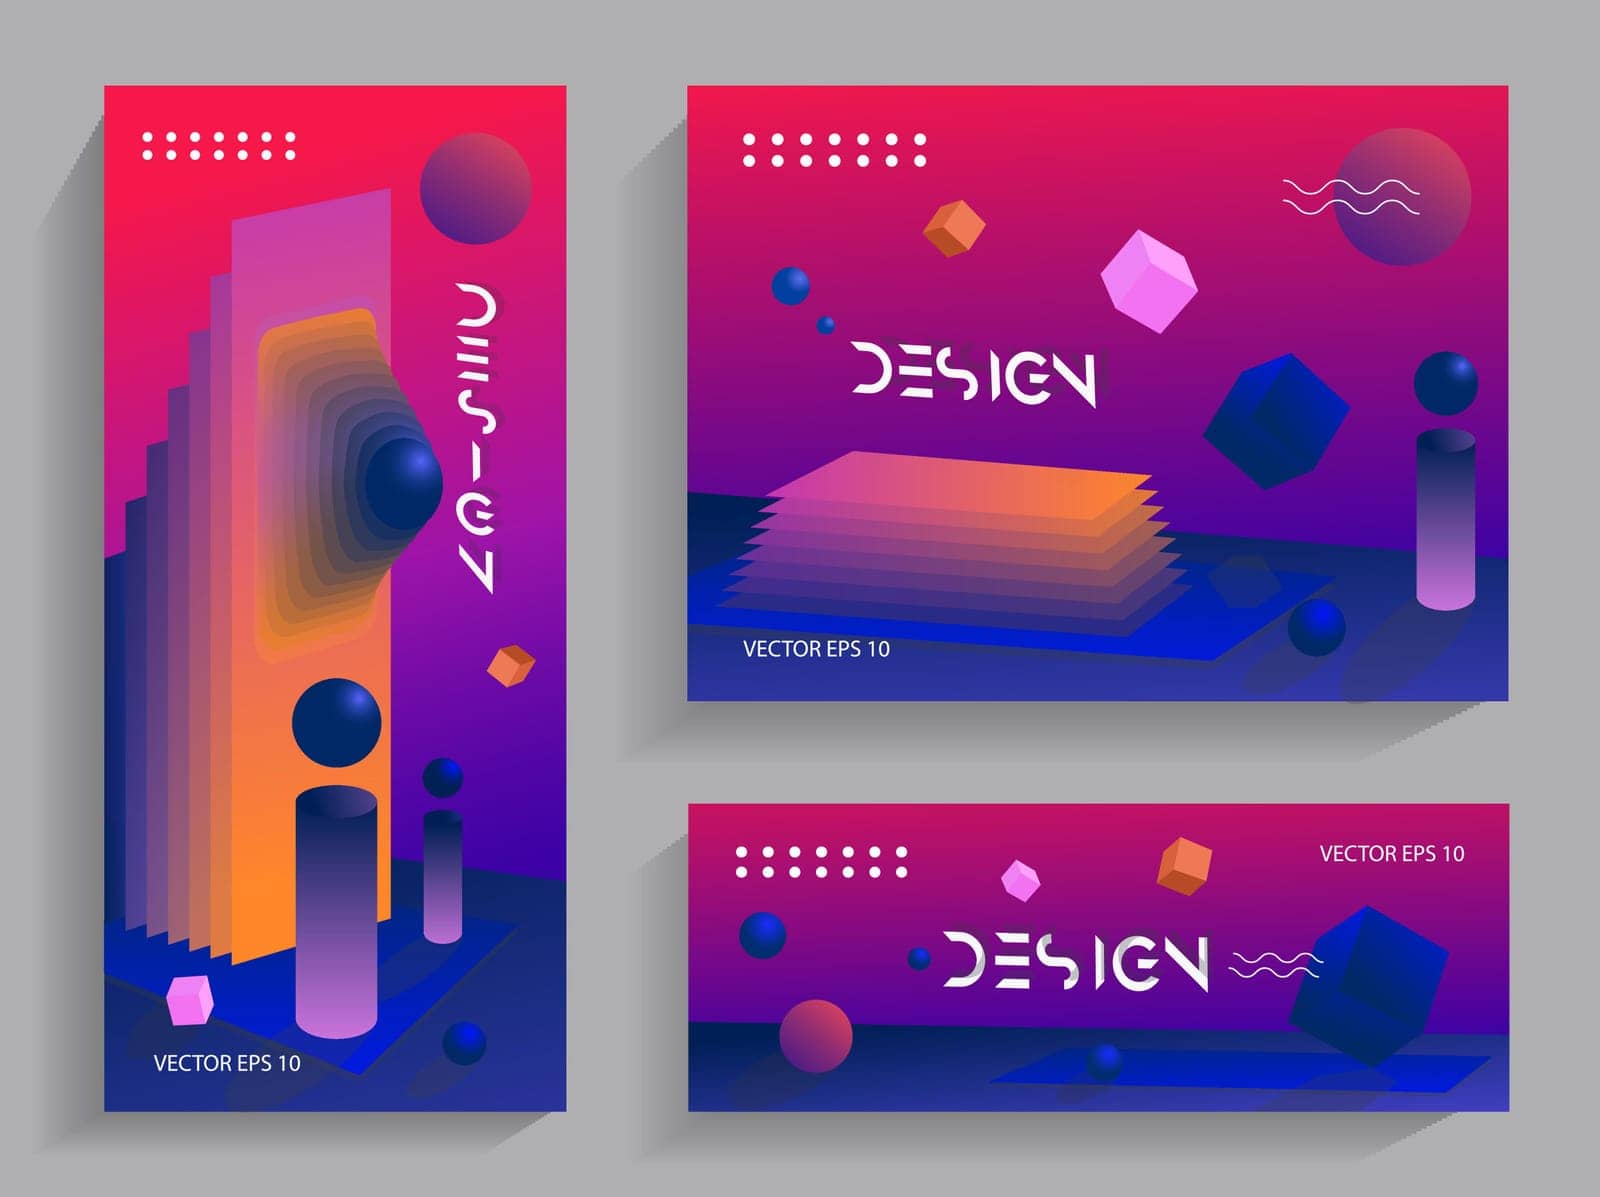 Abstract gradient illustrations, backgrounds for the cover of magazines, brochures, posters, flyers, etc. Crazy bright design. Vector EPS 10